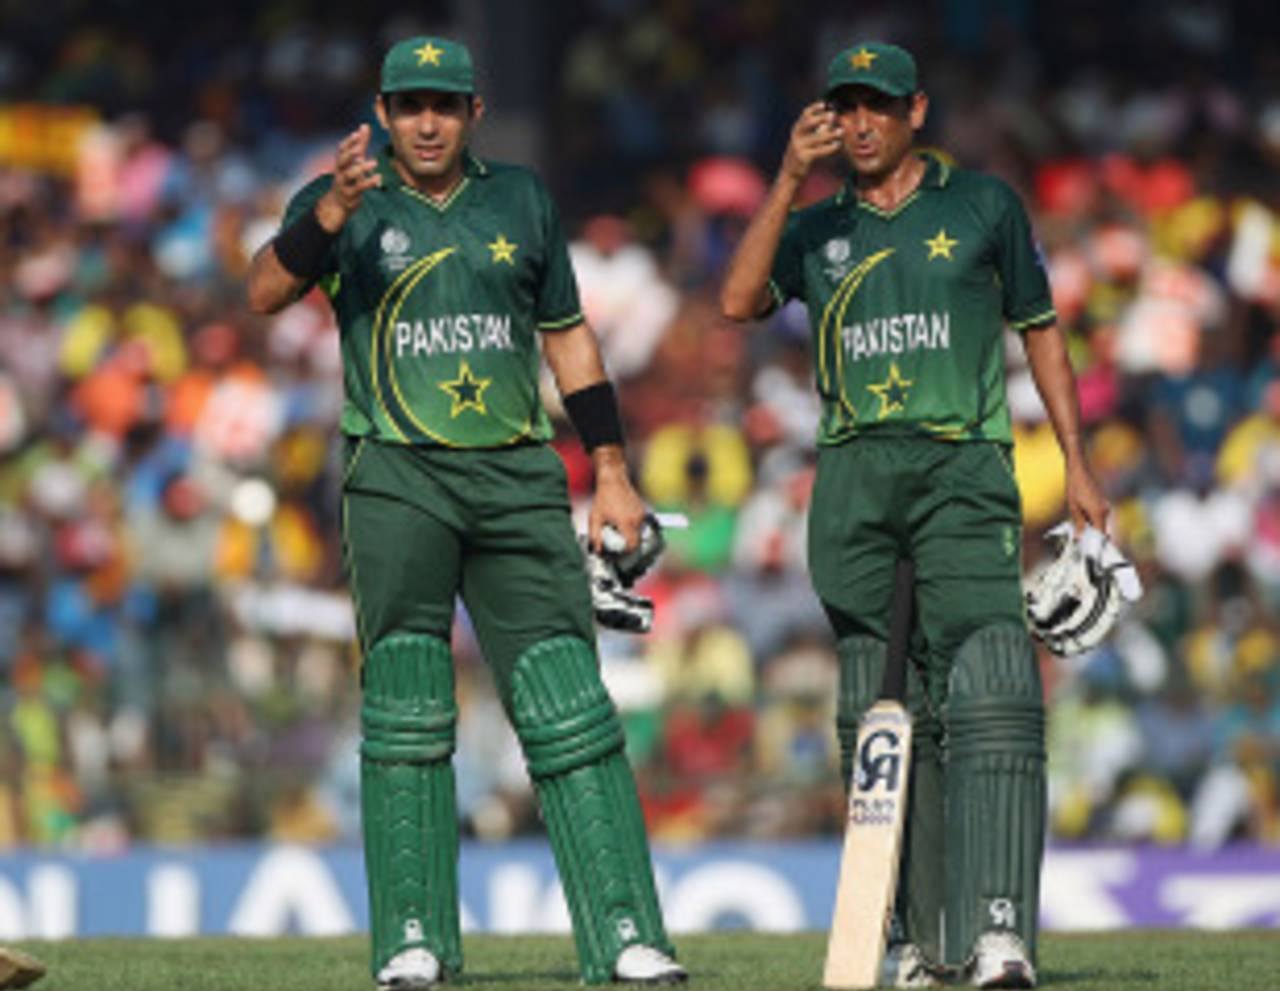 Misbah-ul-Haq and Younis Khan controlled the middle overs to charge Pakistan to a match-winning total&nbsp;&nbsp;&bull;&nbsp;&nbsp;AFP